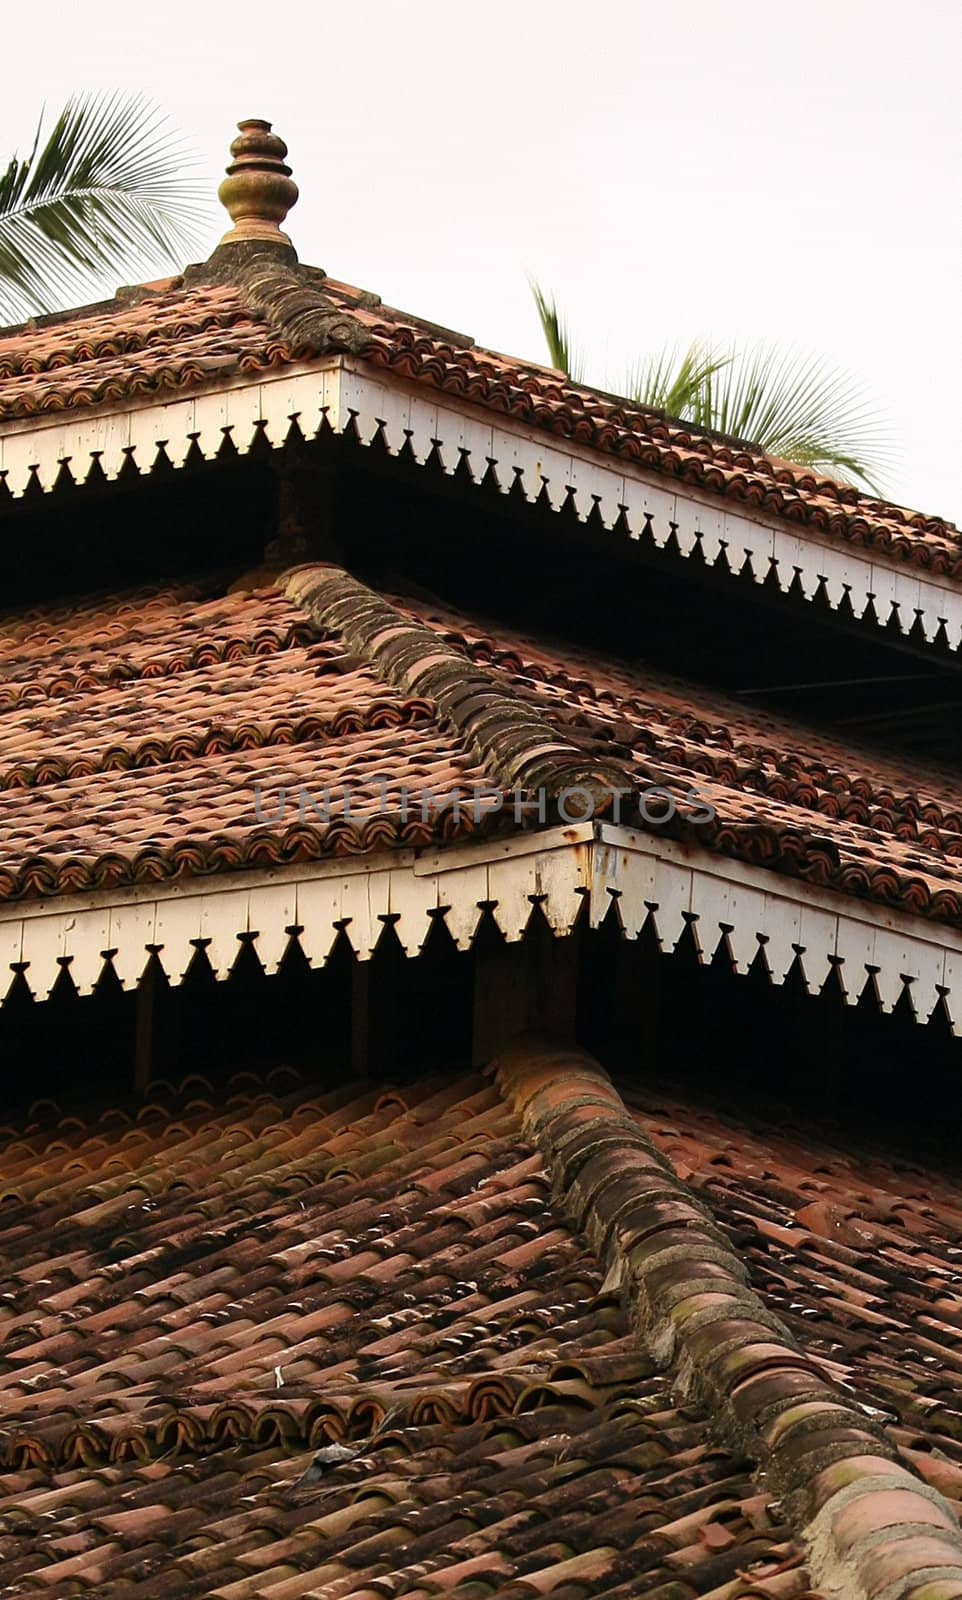 tiled roof of a Buddhist structure